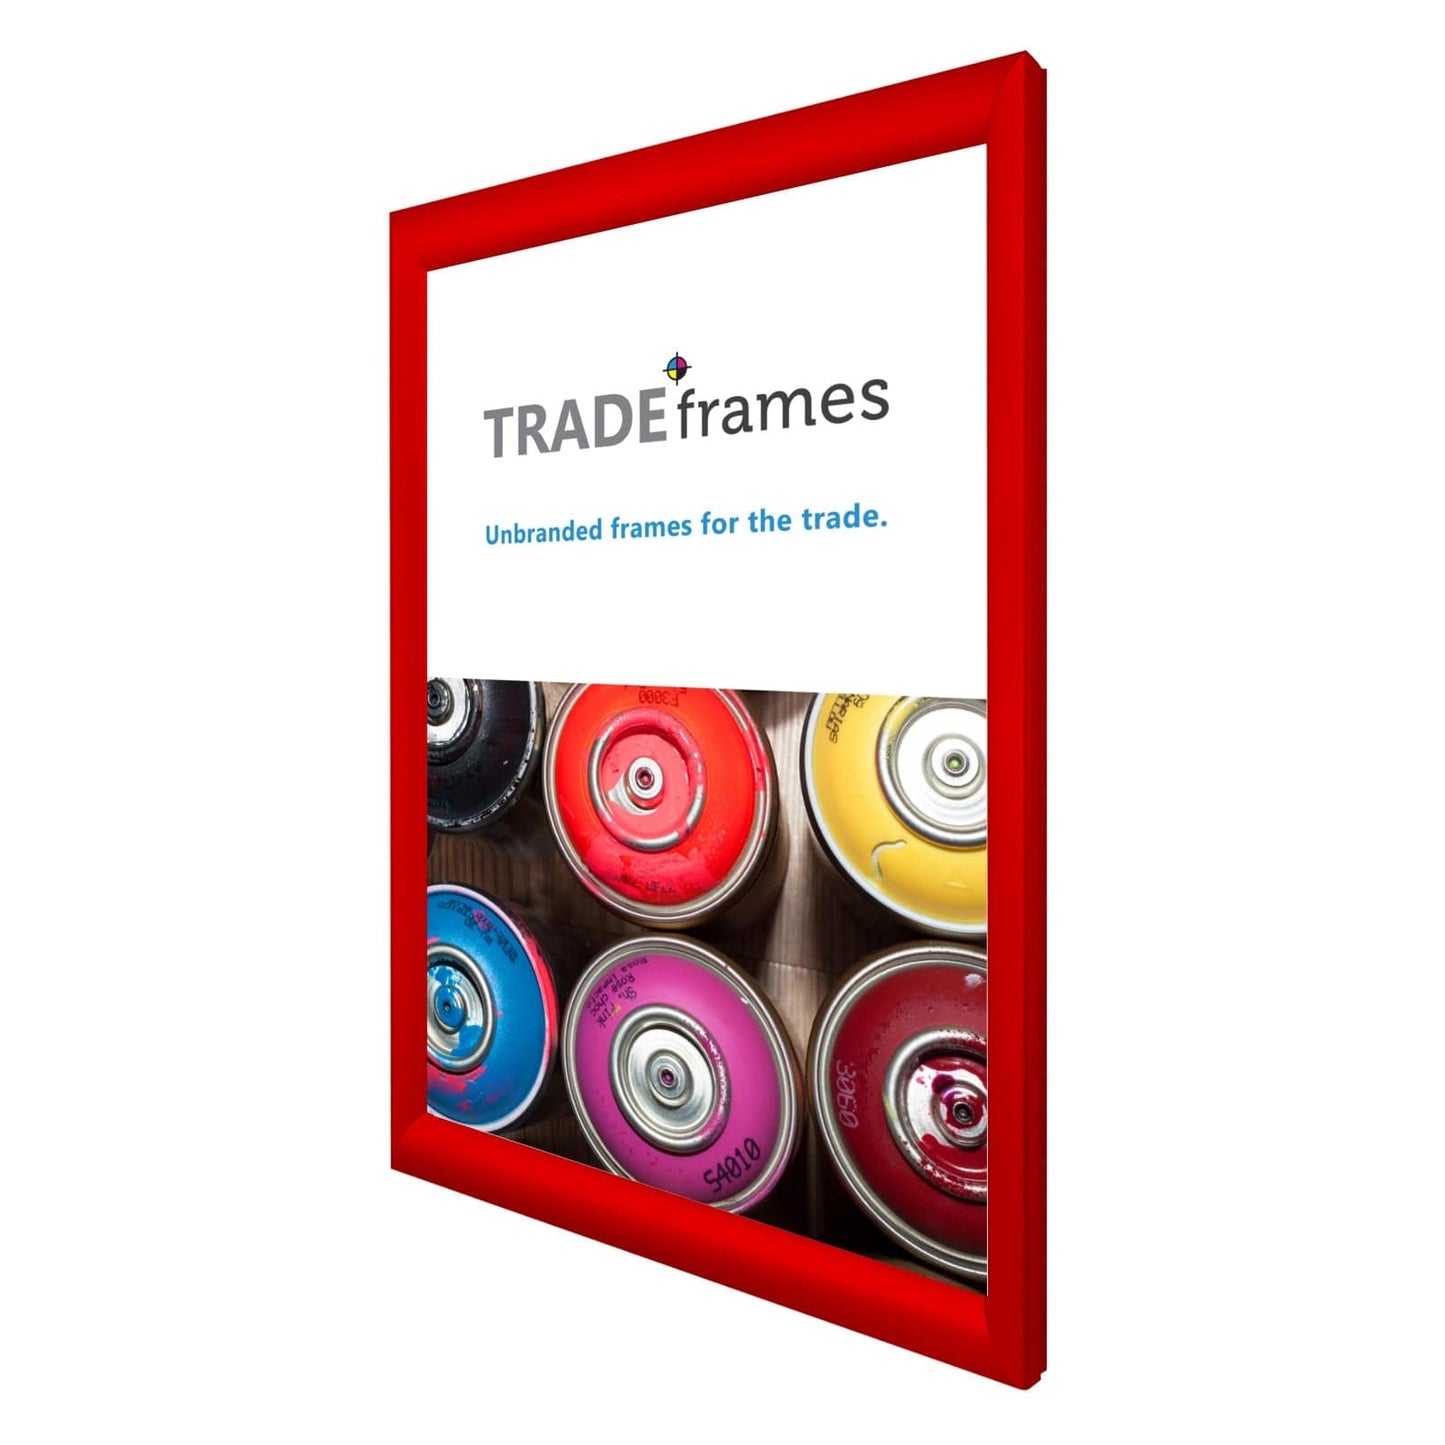 13x19  TRADEframe Red Snap Frame 13x19 - 1.2 inch profile - Snap Frames Direct